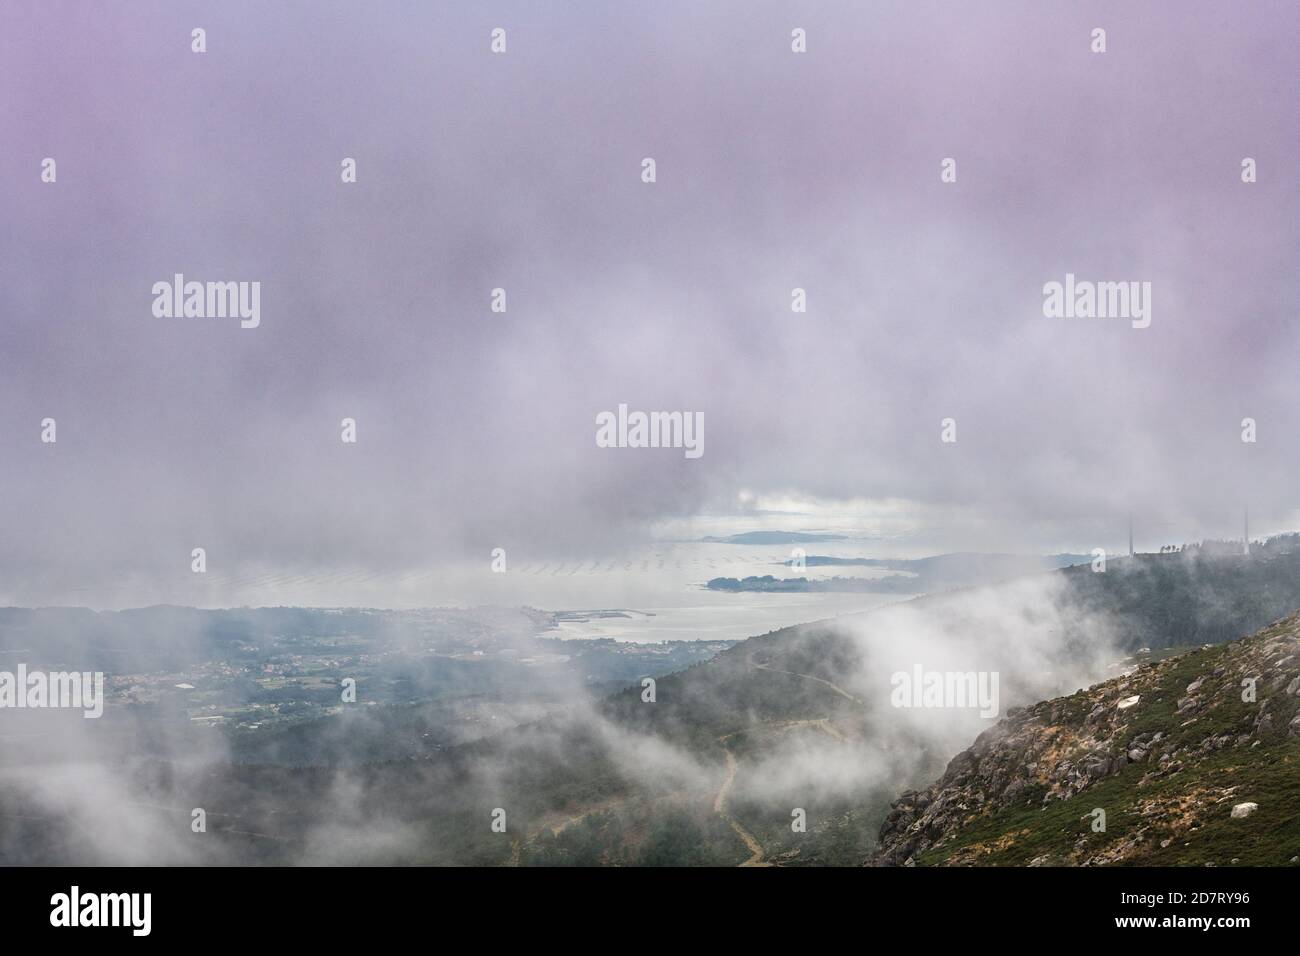 Aerial view of the Ria de Arousa estuary from the Muralla mountain on a foggy Summer afternoon, with some wind turbines among the clouds. Stock Photo